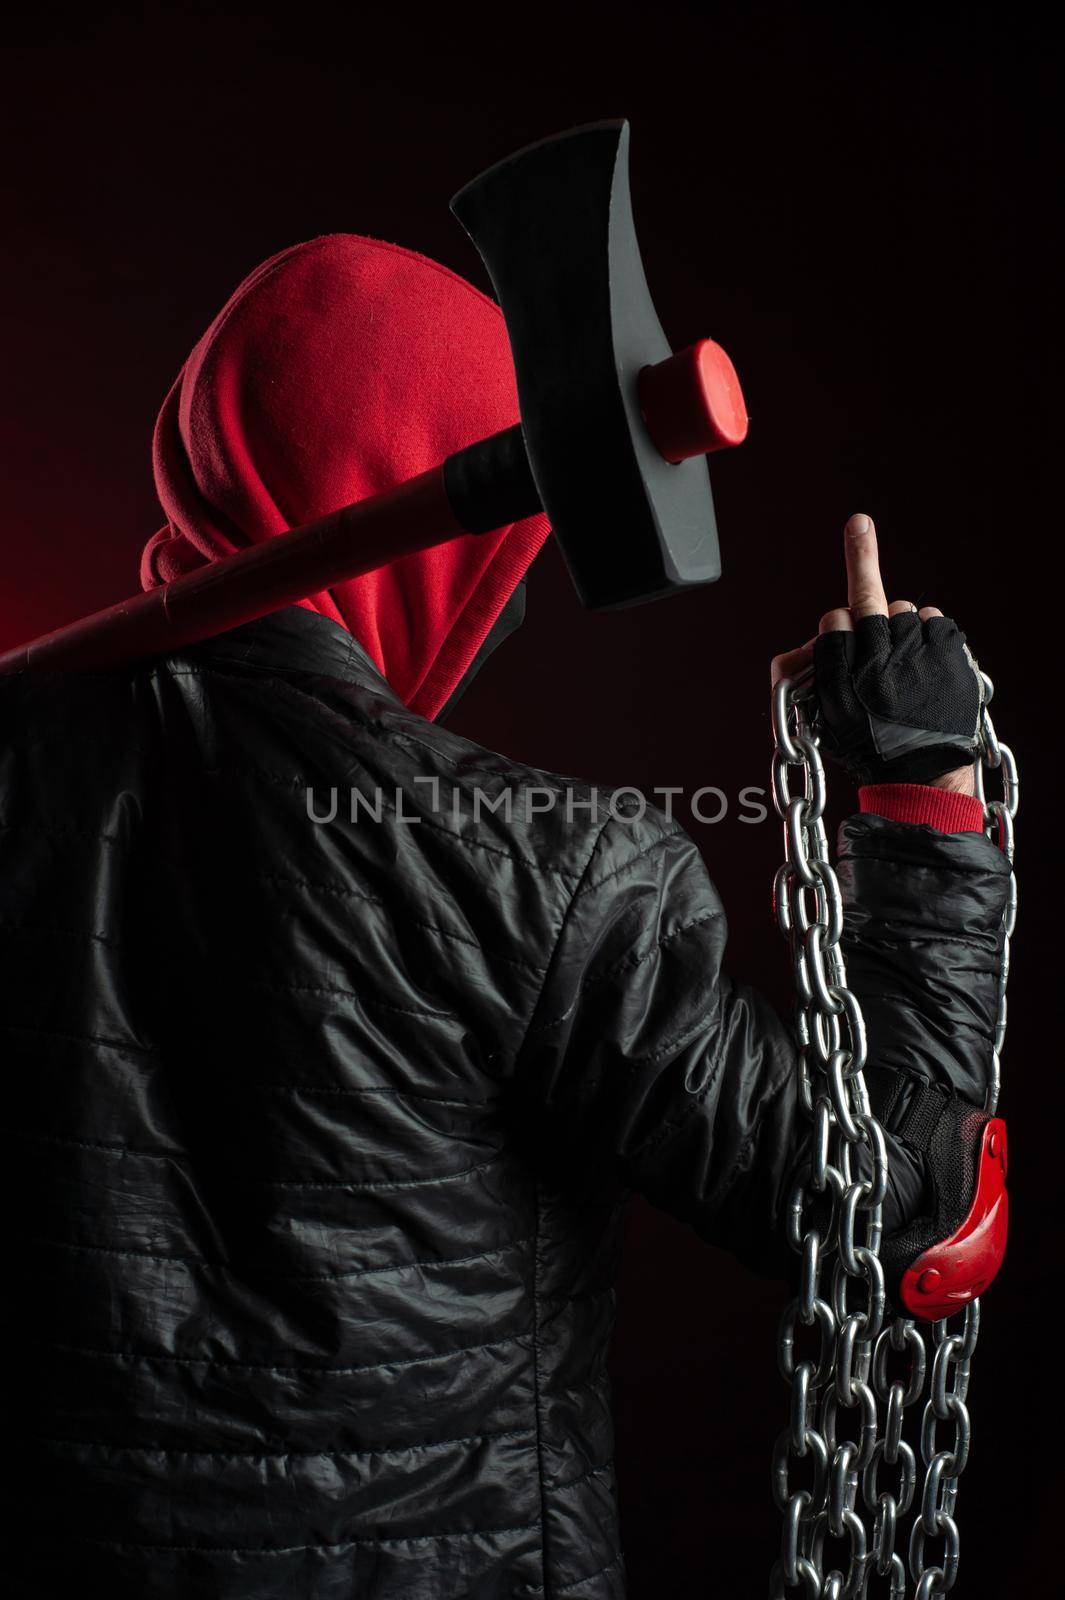 a man in a Balaclava and hoodies with an axe the image of a Protestant shows the middle finger by Rotozey